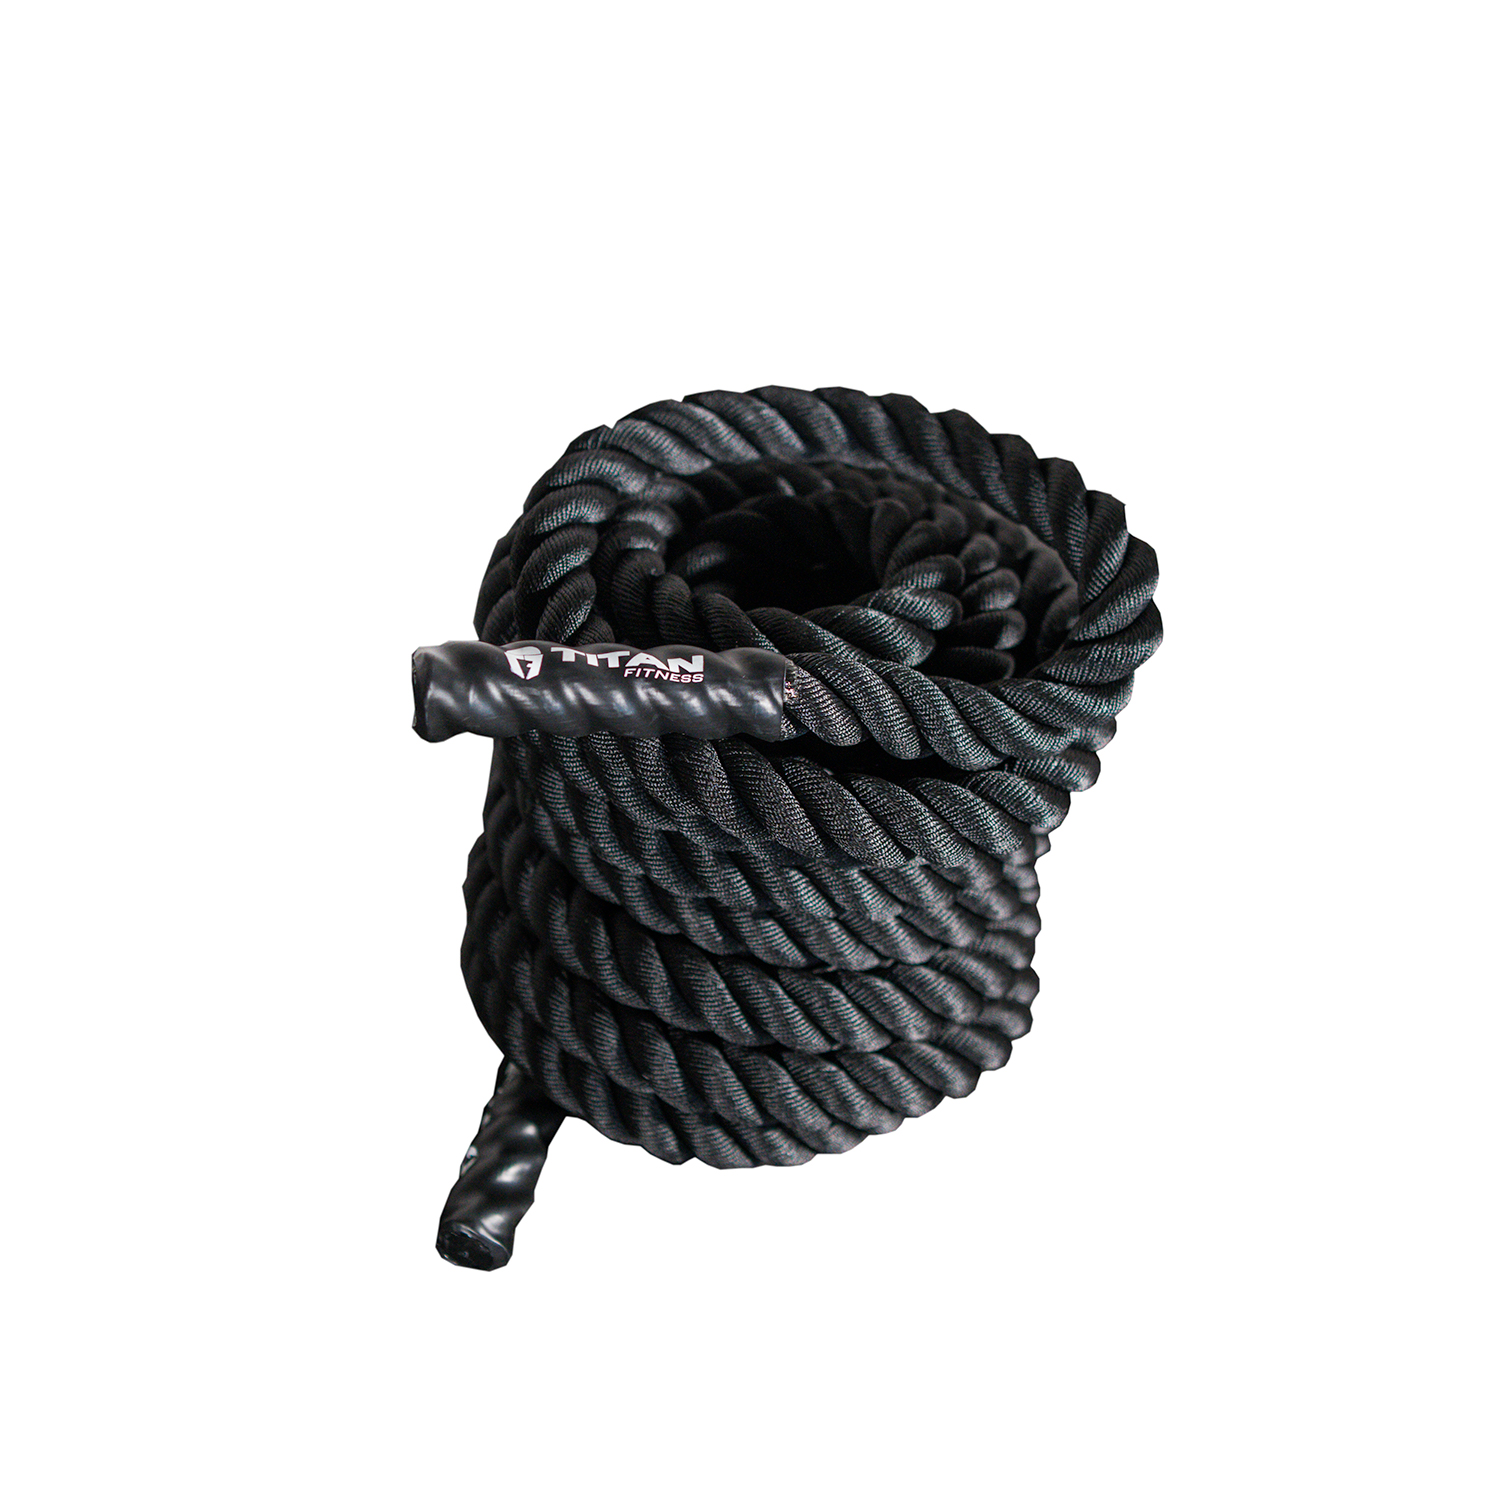 Details about   US 1.5" 50FT Heavy Battle Rope Fitness Climbing Training Undulation For Home Gym 